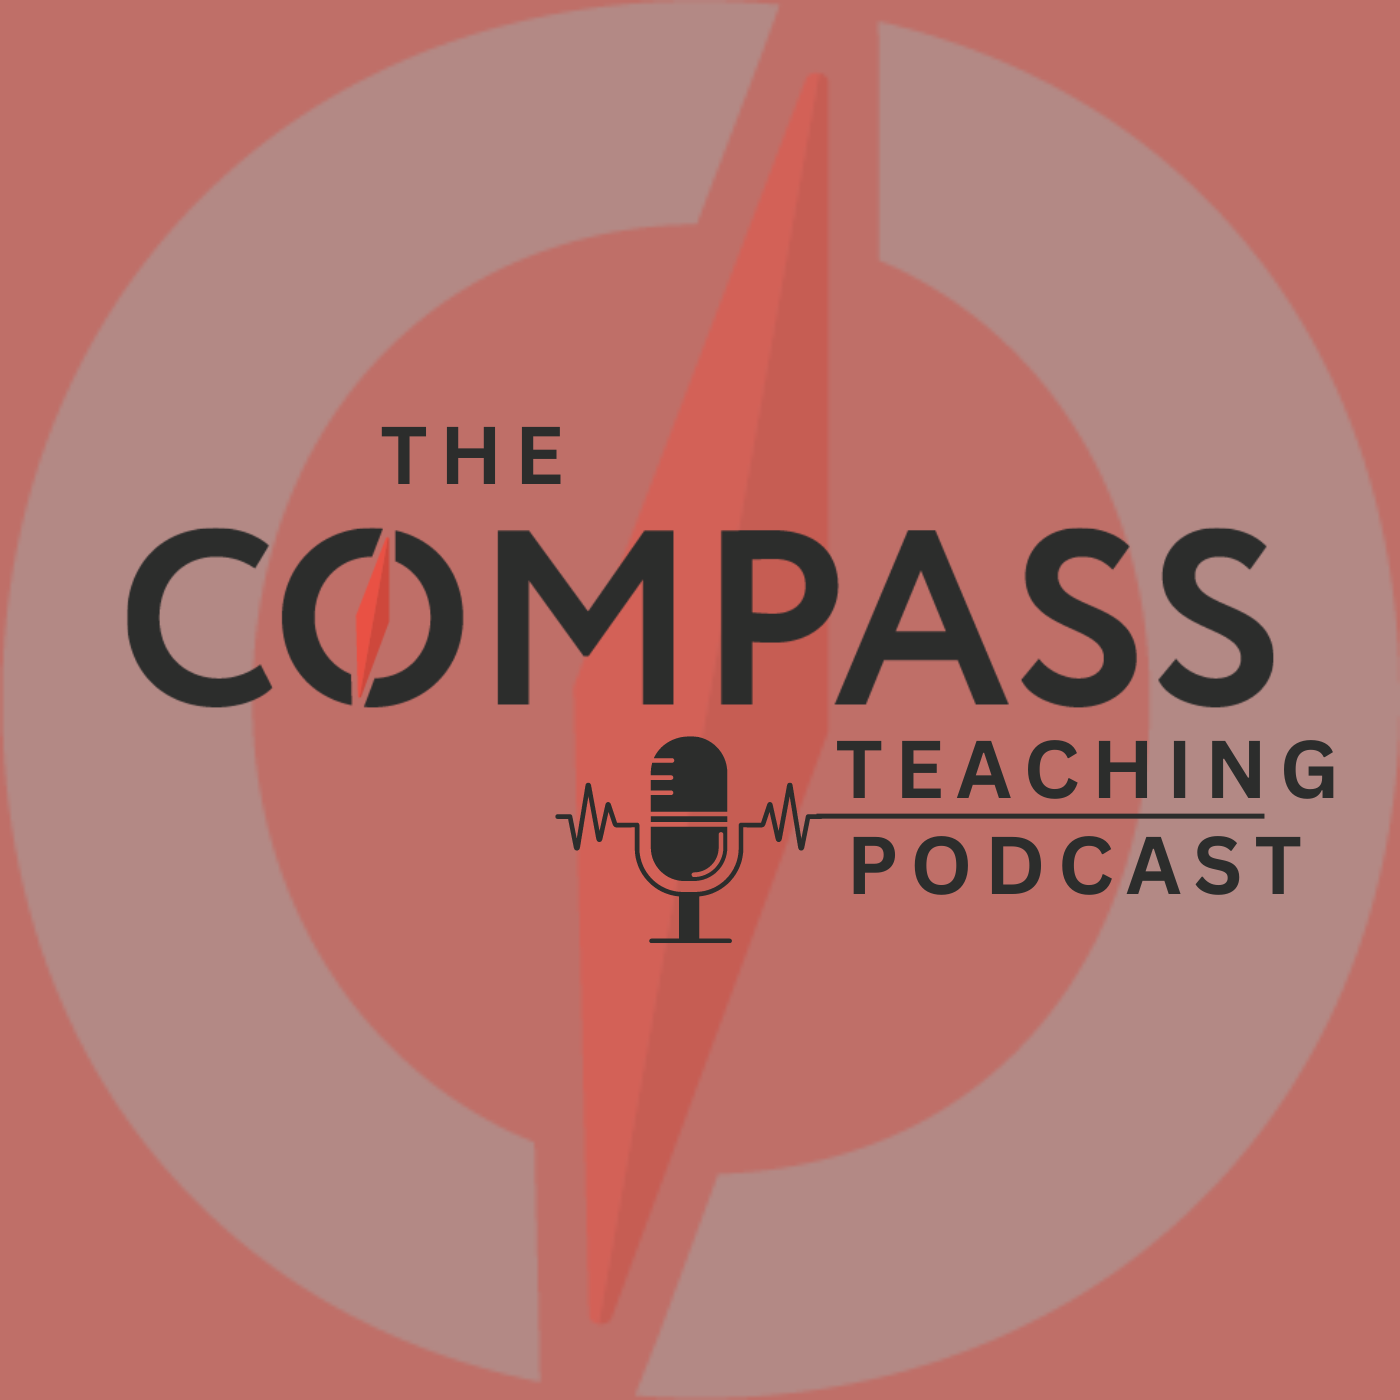 The Compass Teaching Podcast